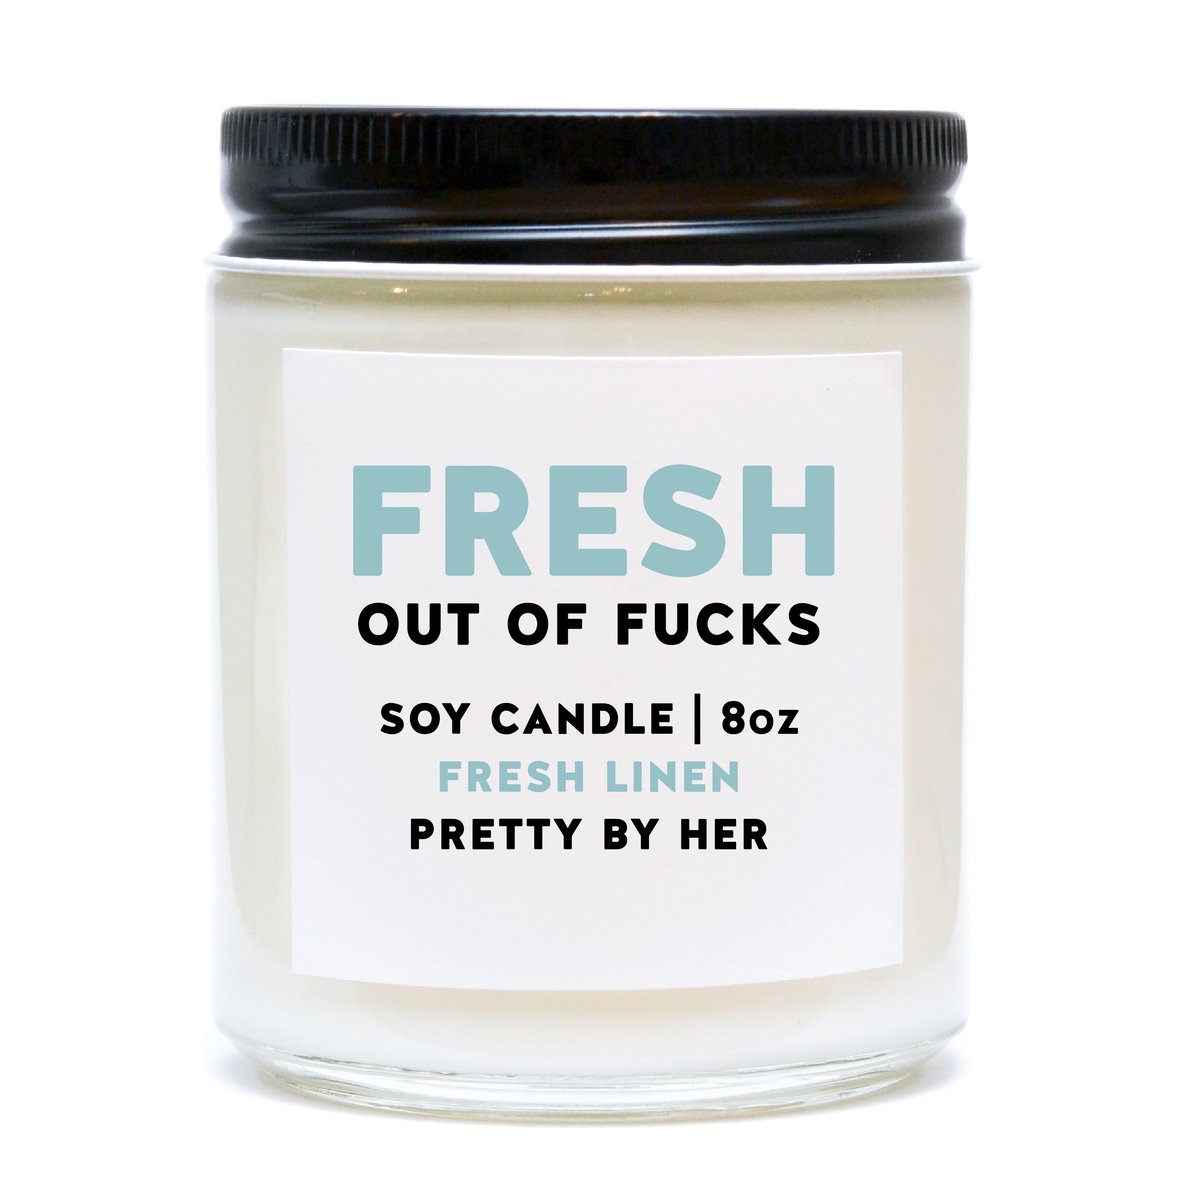 FRESH OUT OF FUCKS CANDLE